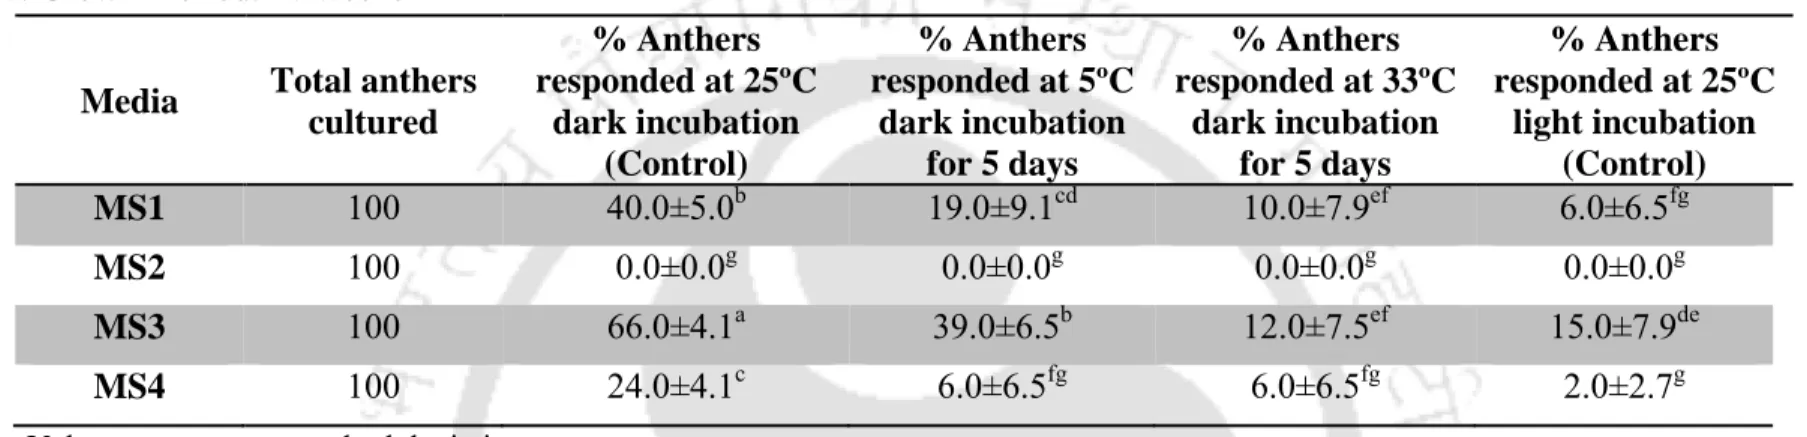 Table 3.3: Effect of temperature pre-treatments on percent callus induction in anthers of TV1 cultivar cultured on the responding  media